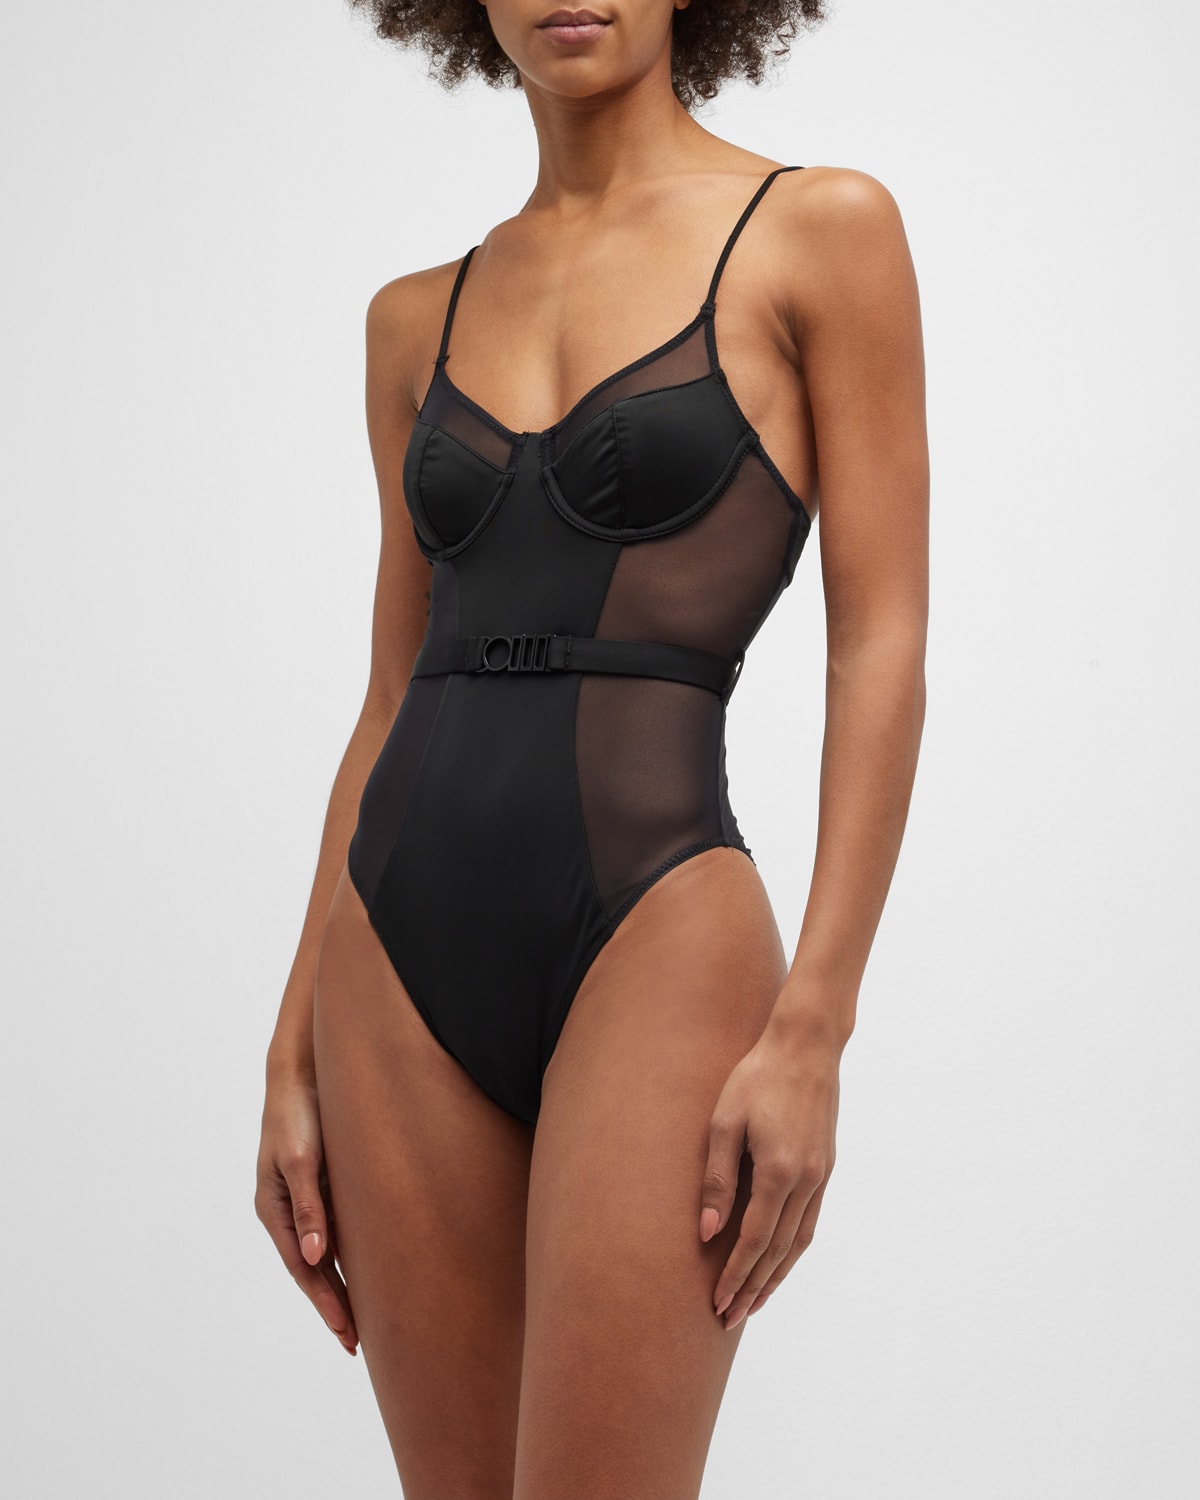 The Spencer Mesh Underwire One-Piece Swimsuit